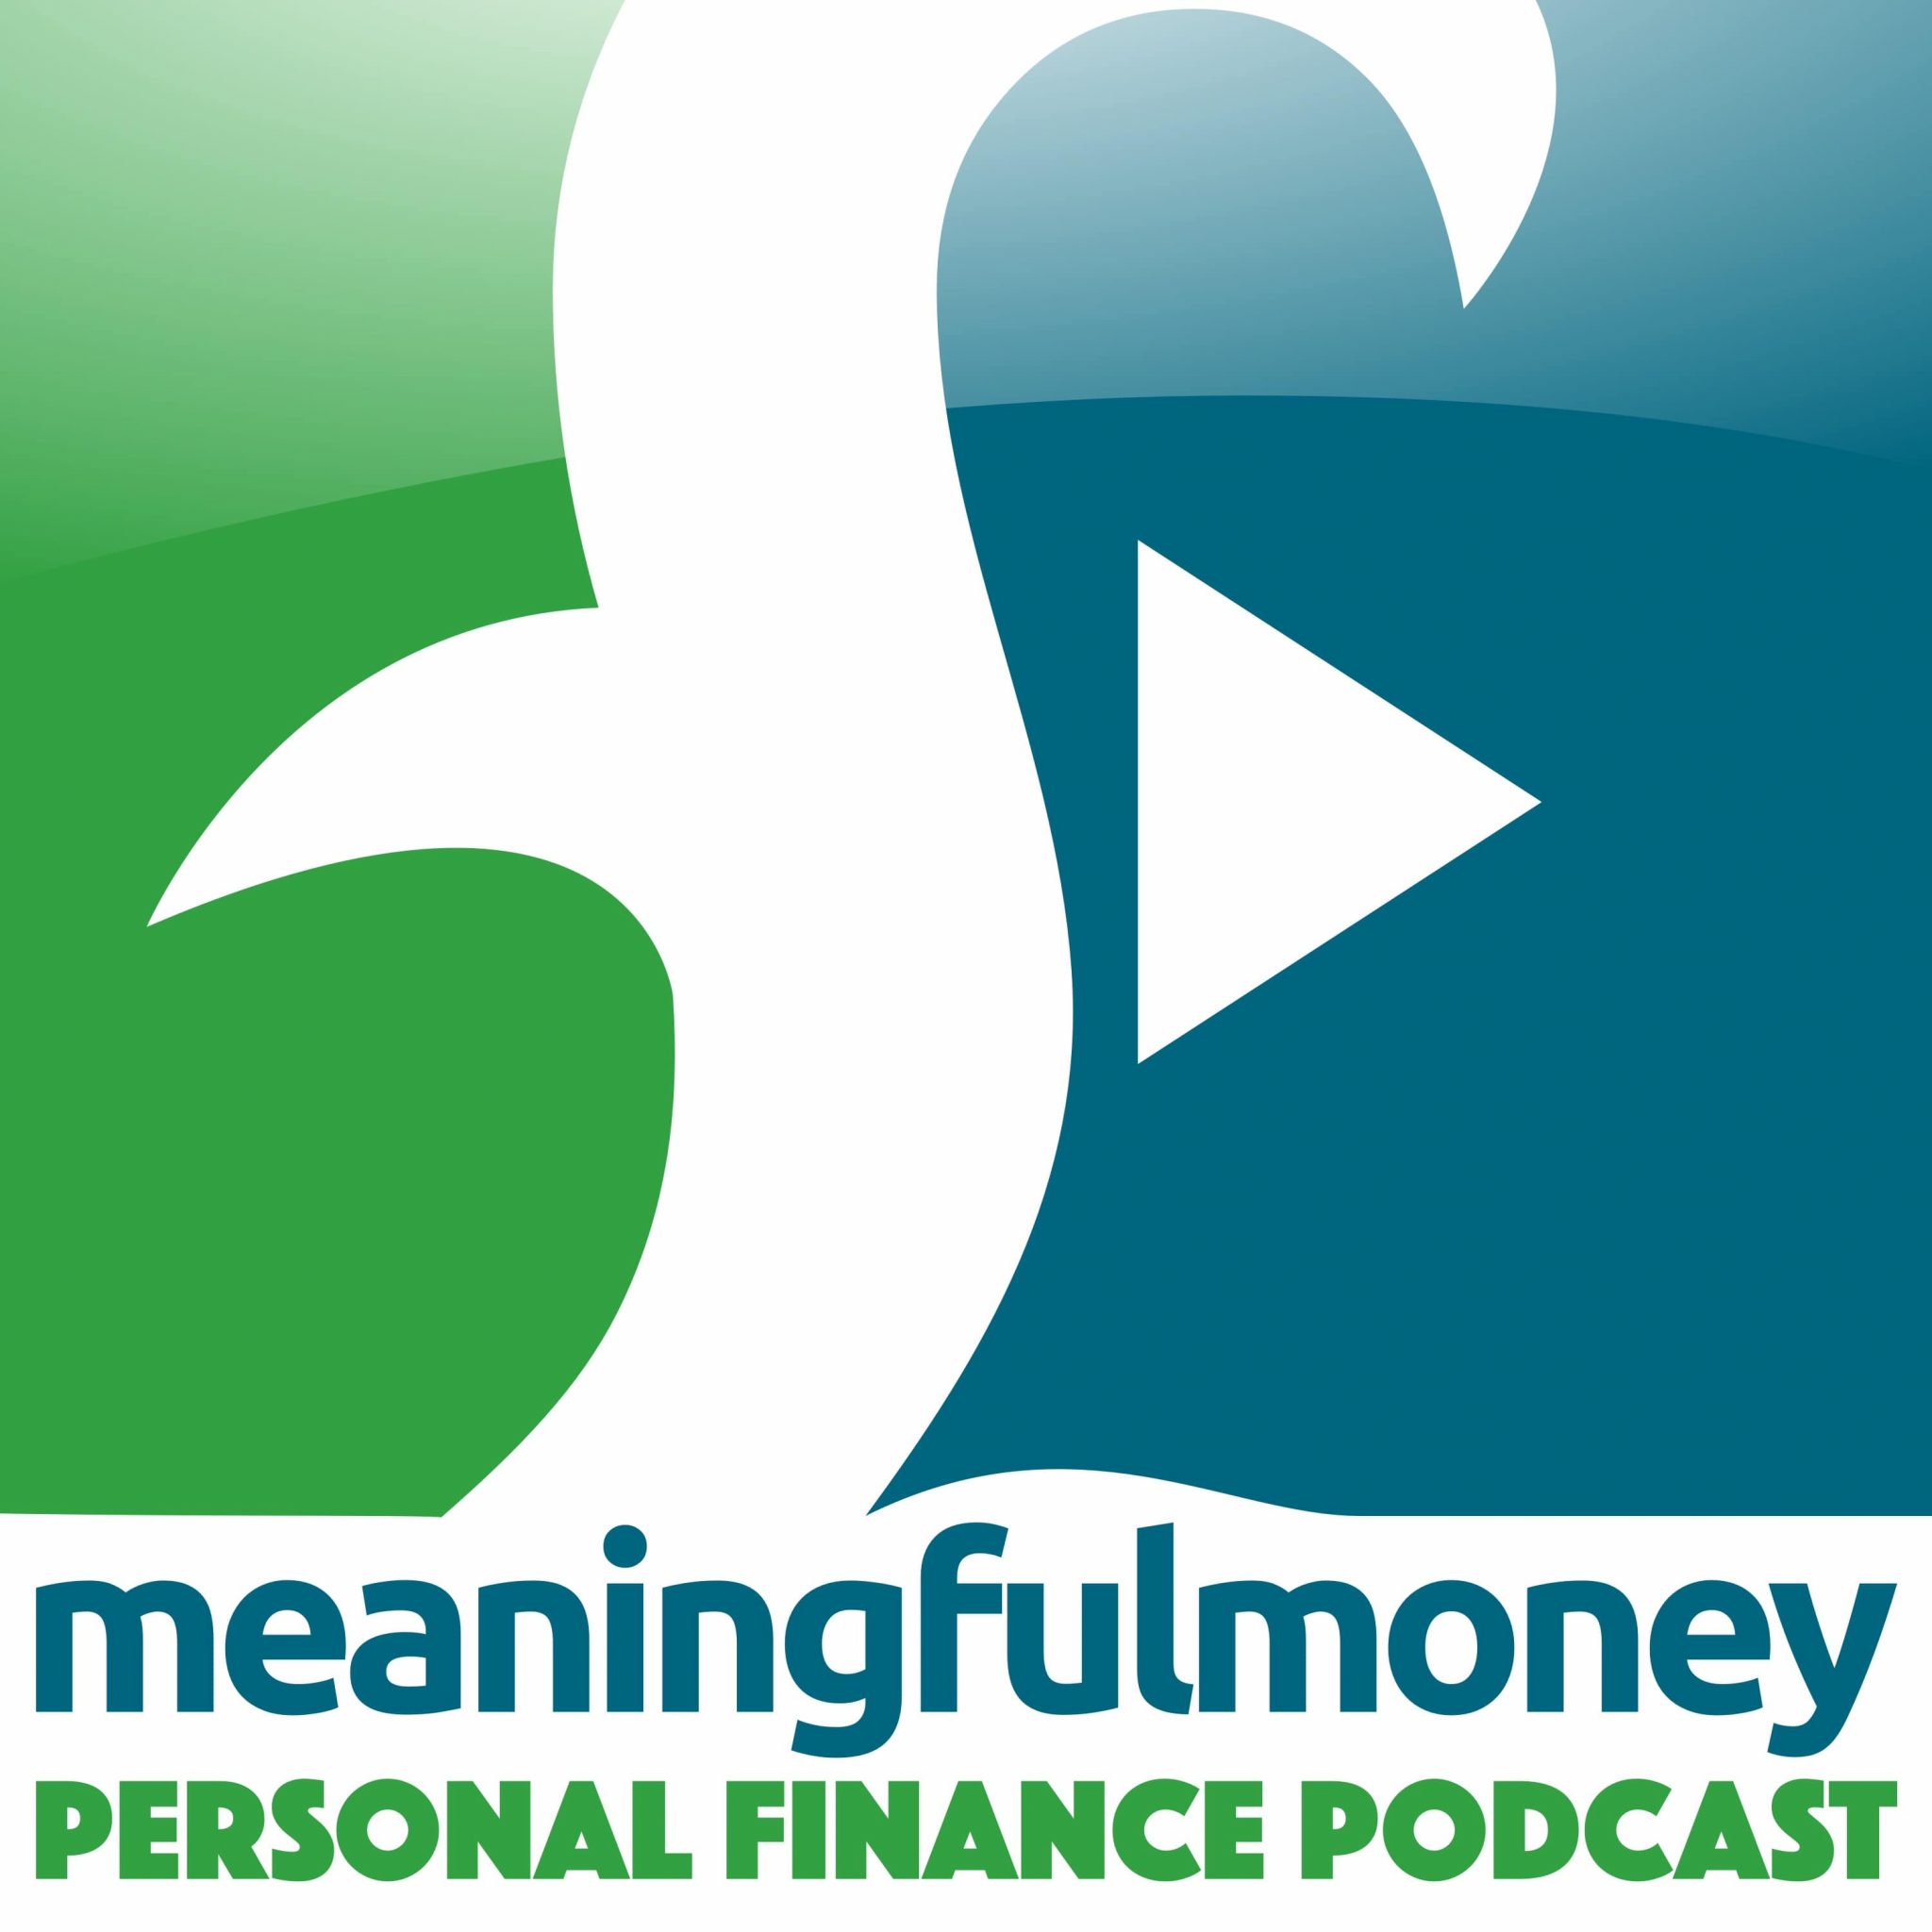 The 20 Best Finance Podcasts 2024 Mustlisten Podcasts